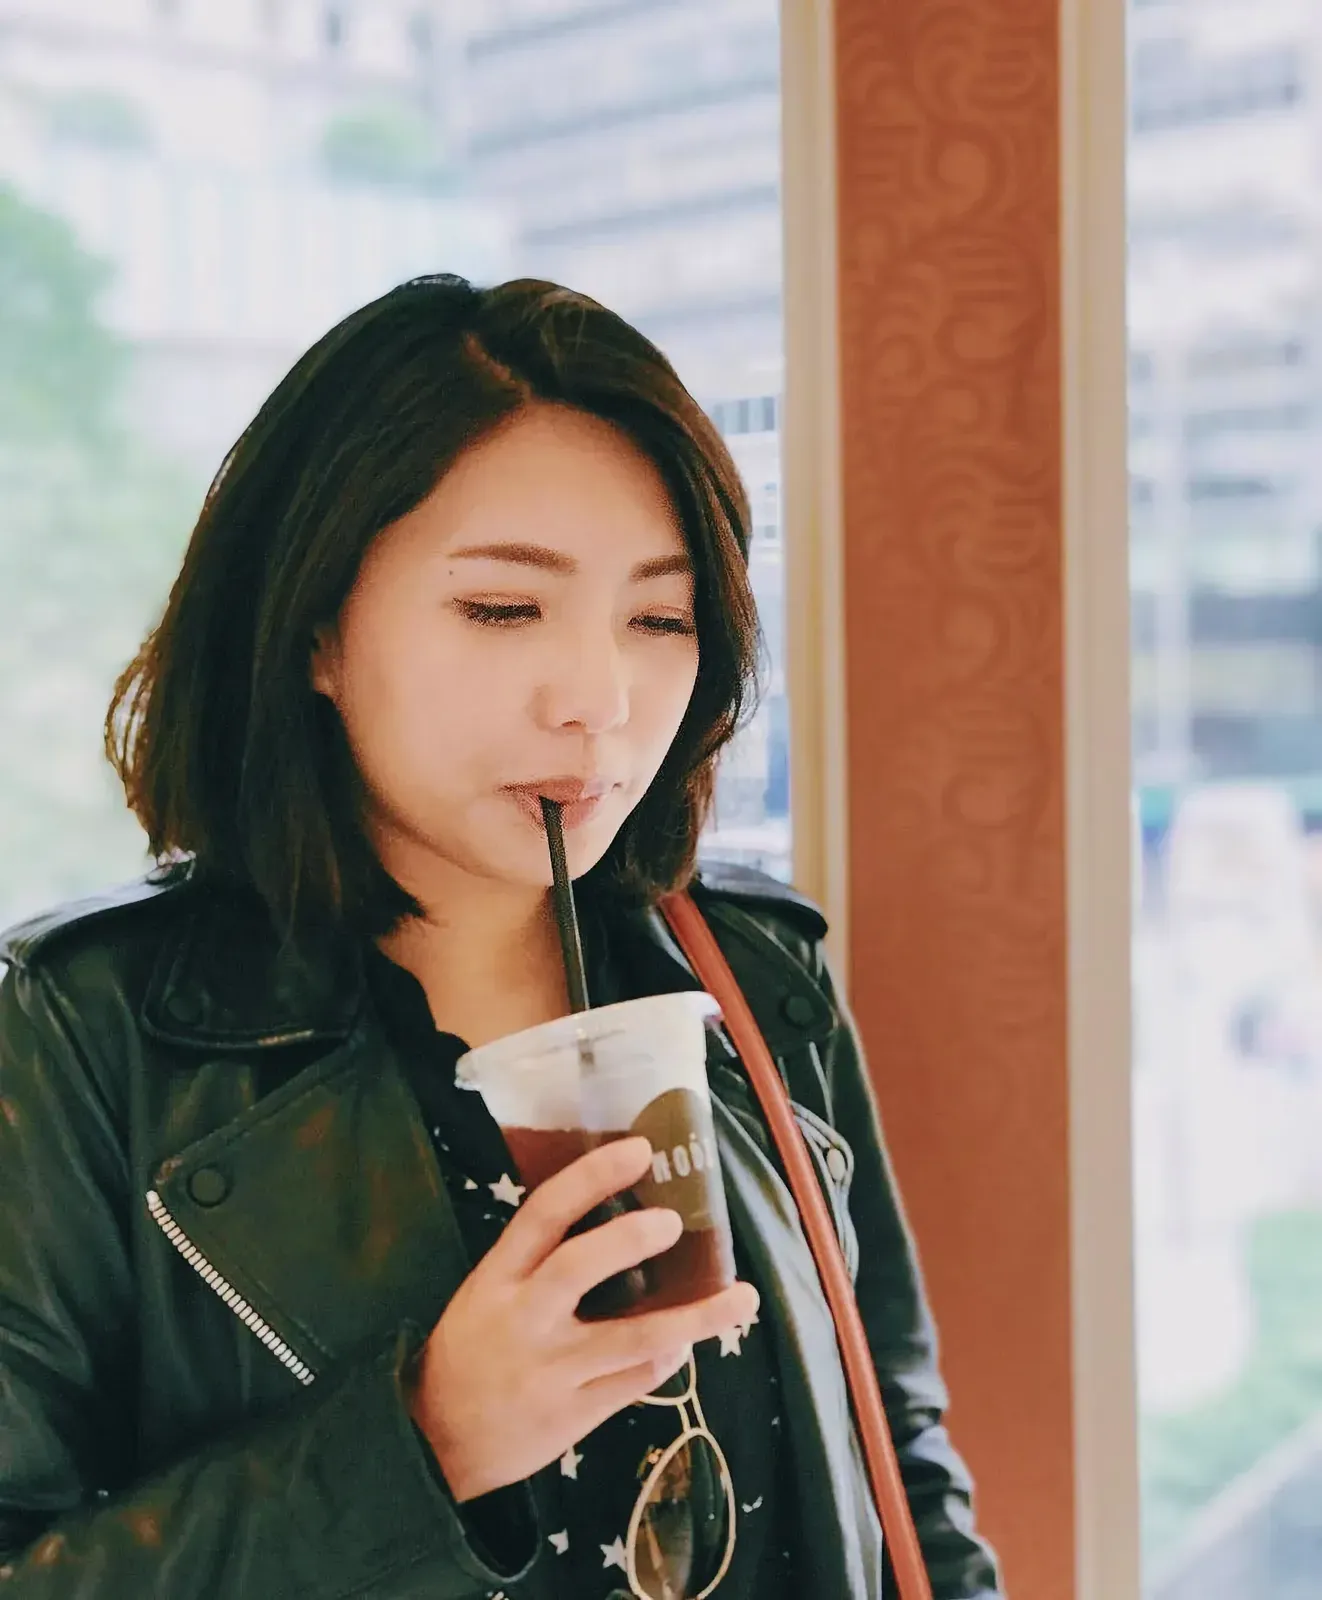 Woman in casual setting drinking coffee and taking a selfie with her cellphone.